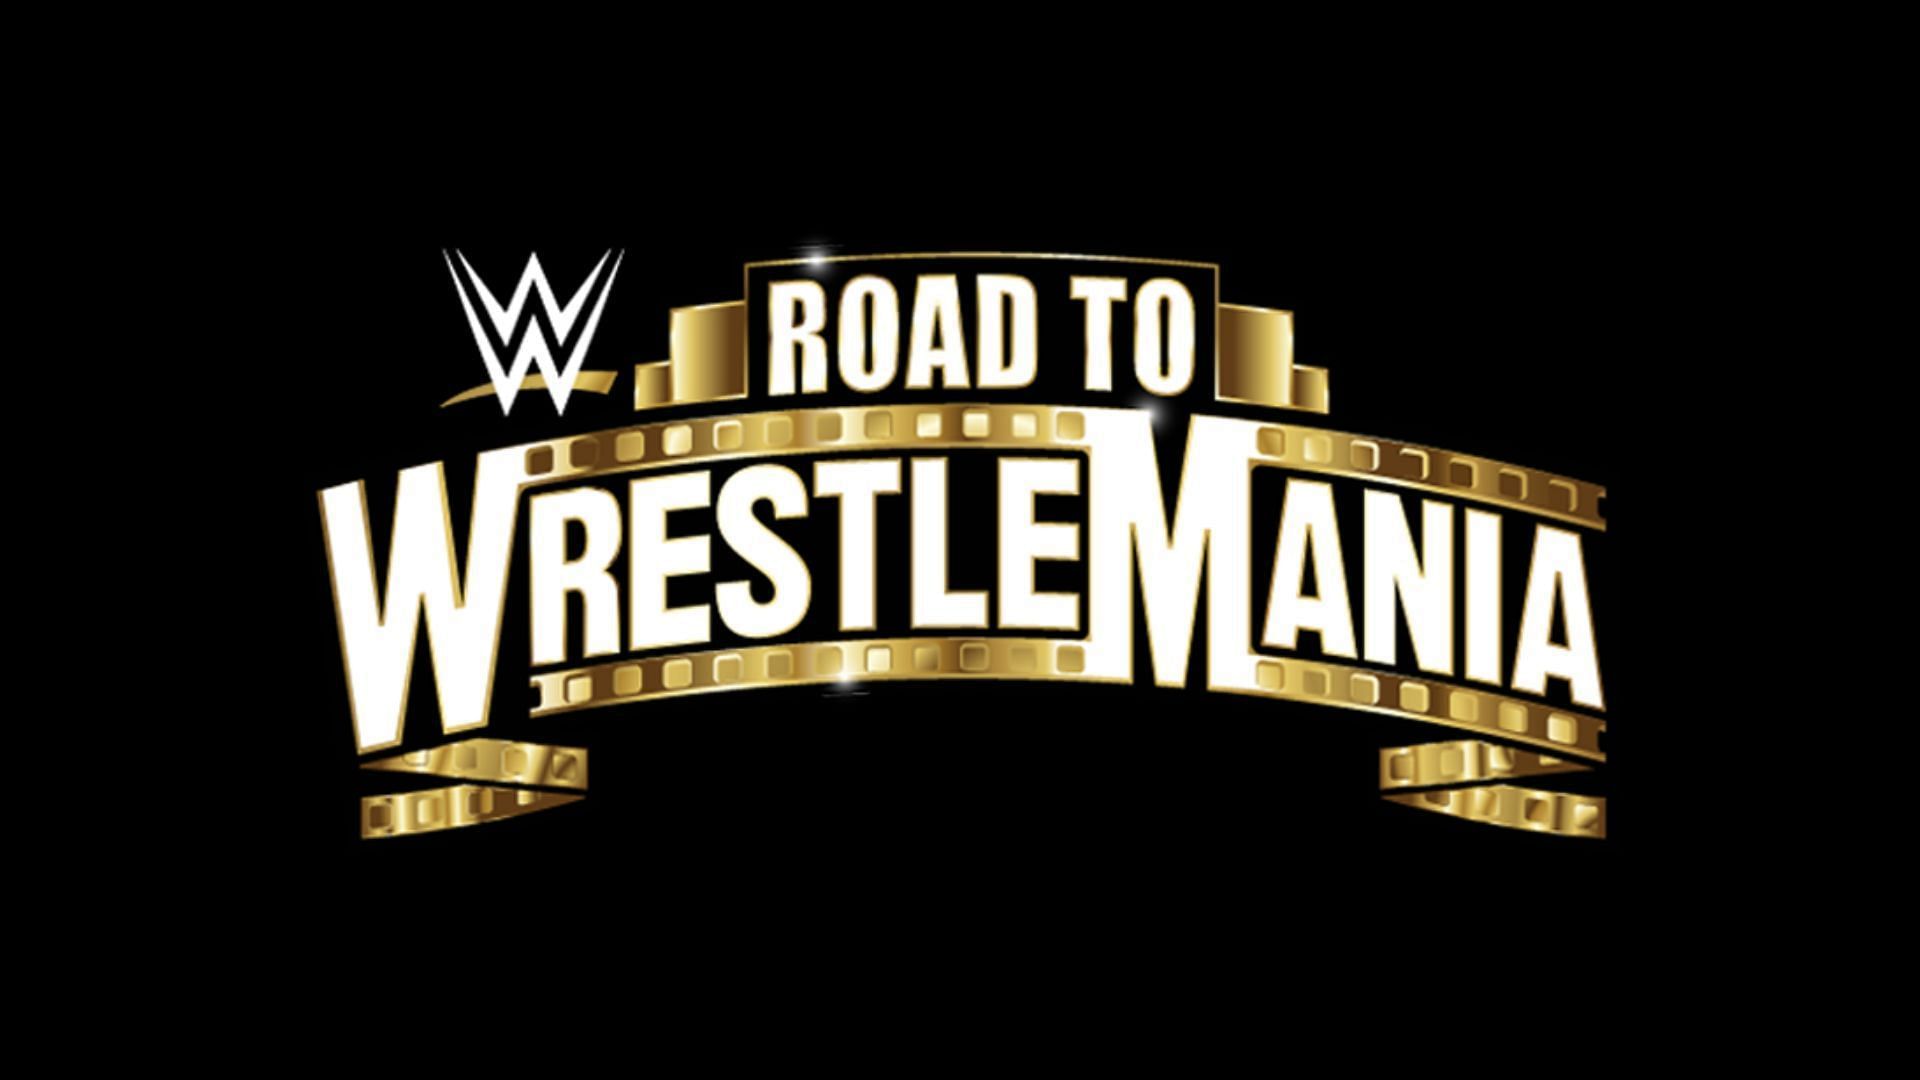 WWE is stacking up the card for WrestleMania 39